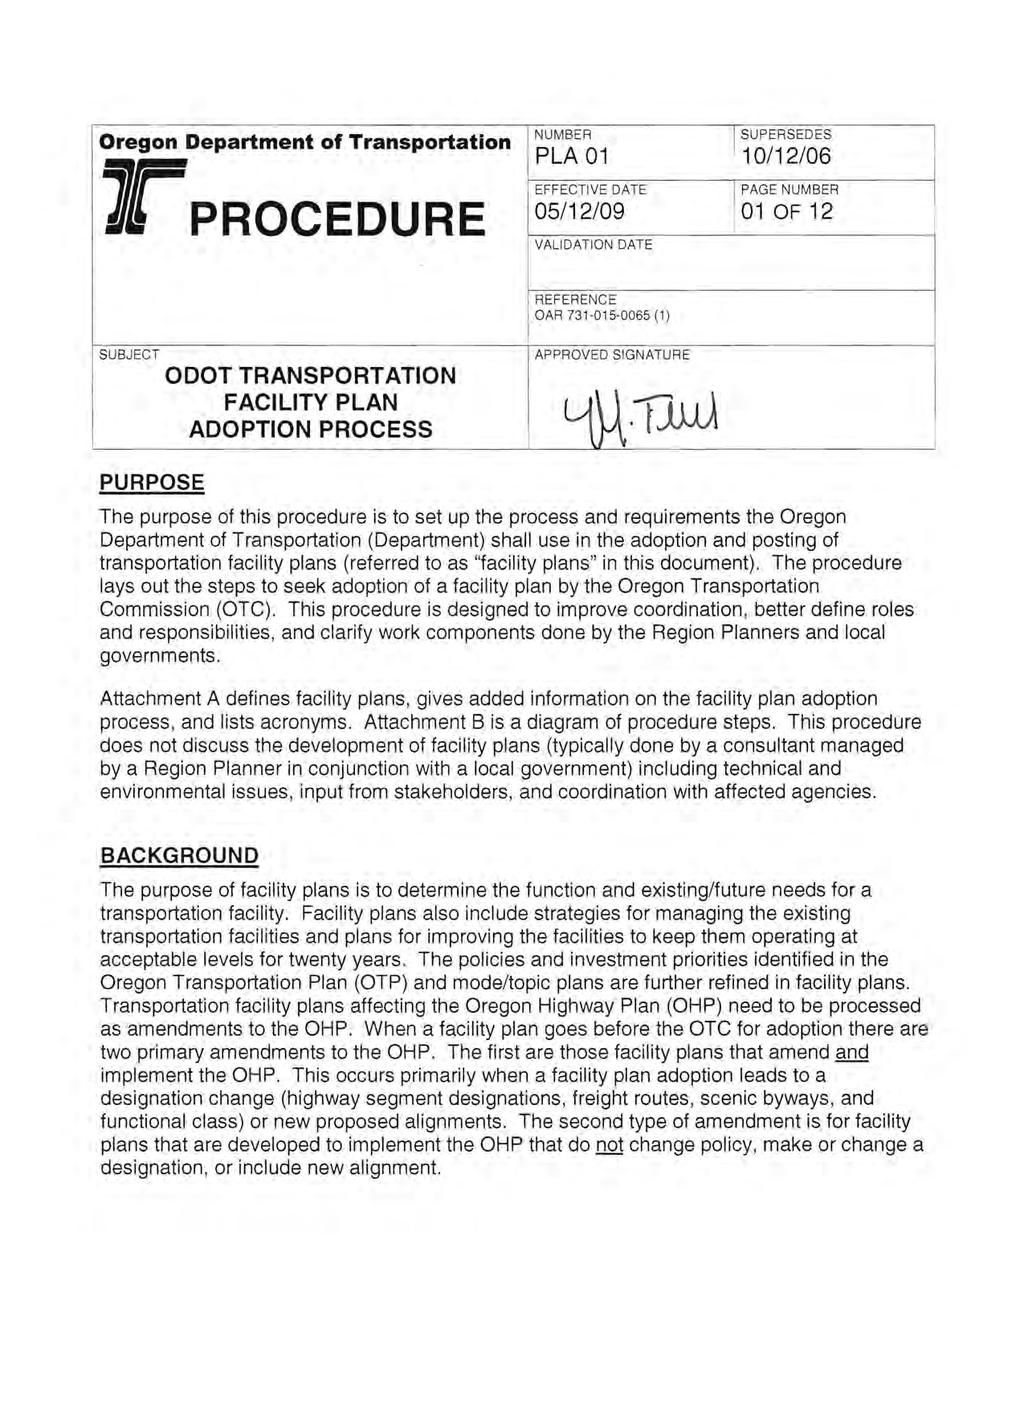 Oregon Department of Transportation 7rPROCEDURE NUMBER I SUPERSEDES PLA 01 10/12/06 EFFECTIVE DATE 05/12/09 VALIDATION DATE PAGE NUMBER 01 OF 12 REFERENCE OAR 731-015-0065 (1) SUBJECT ODOT